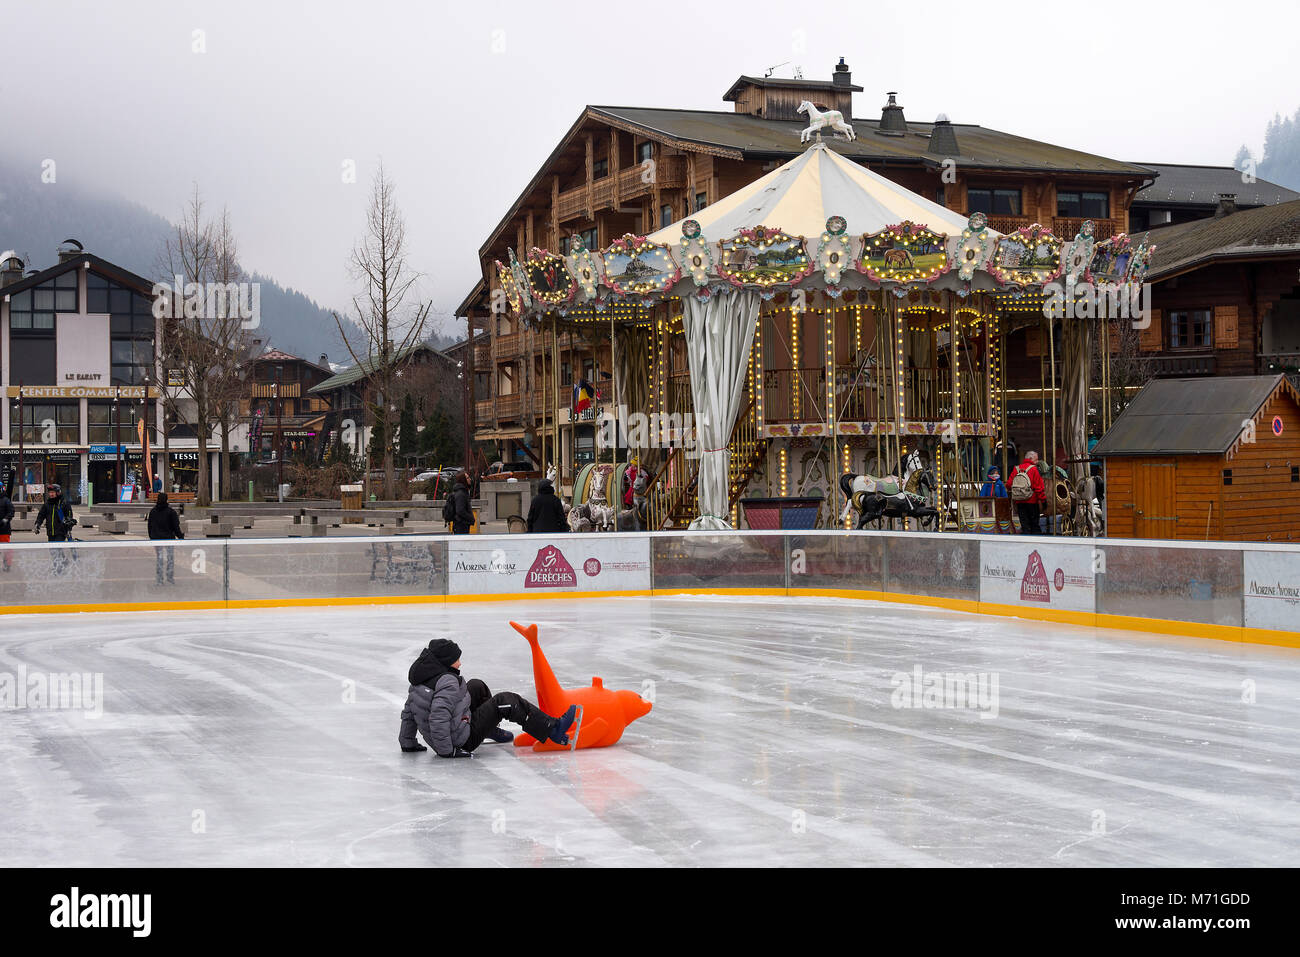 The Outdoor Ice Skating Rink and Carousel Roundabout in the Town Square With Shops in Morzine Haute Savoie Portes du Soleil French Alps France Stock Photo